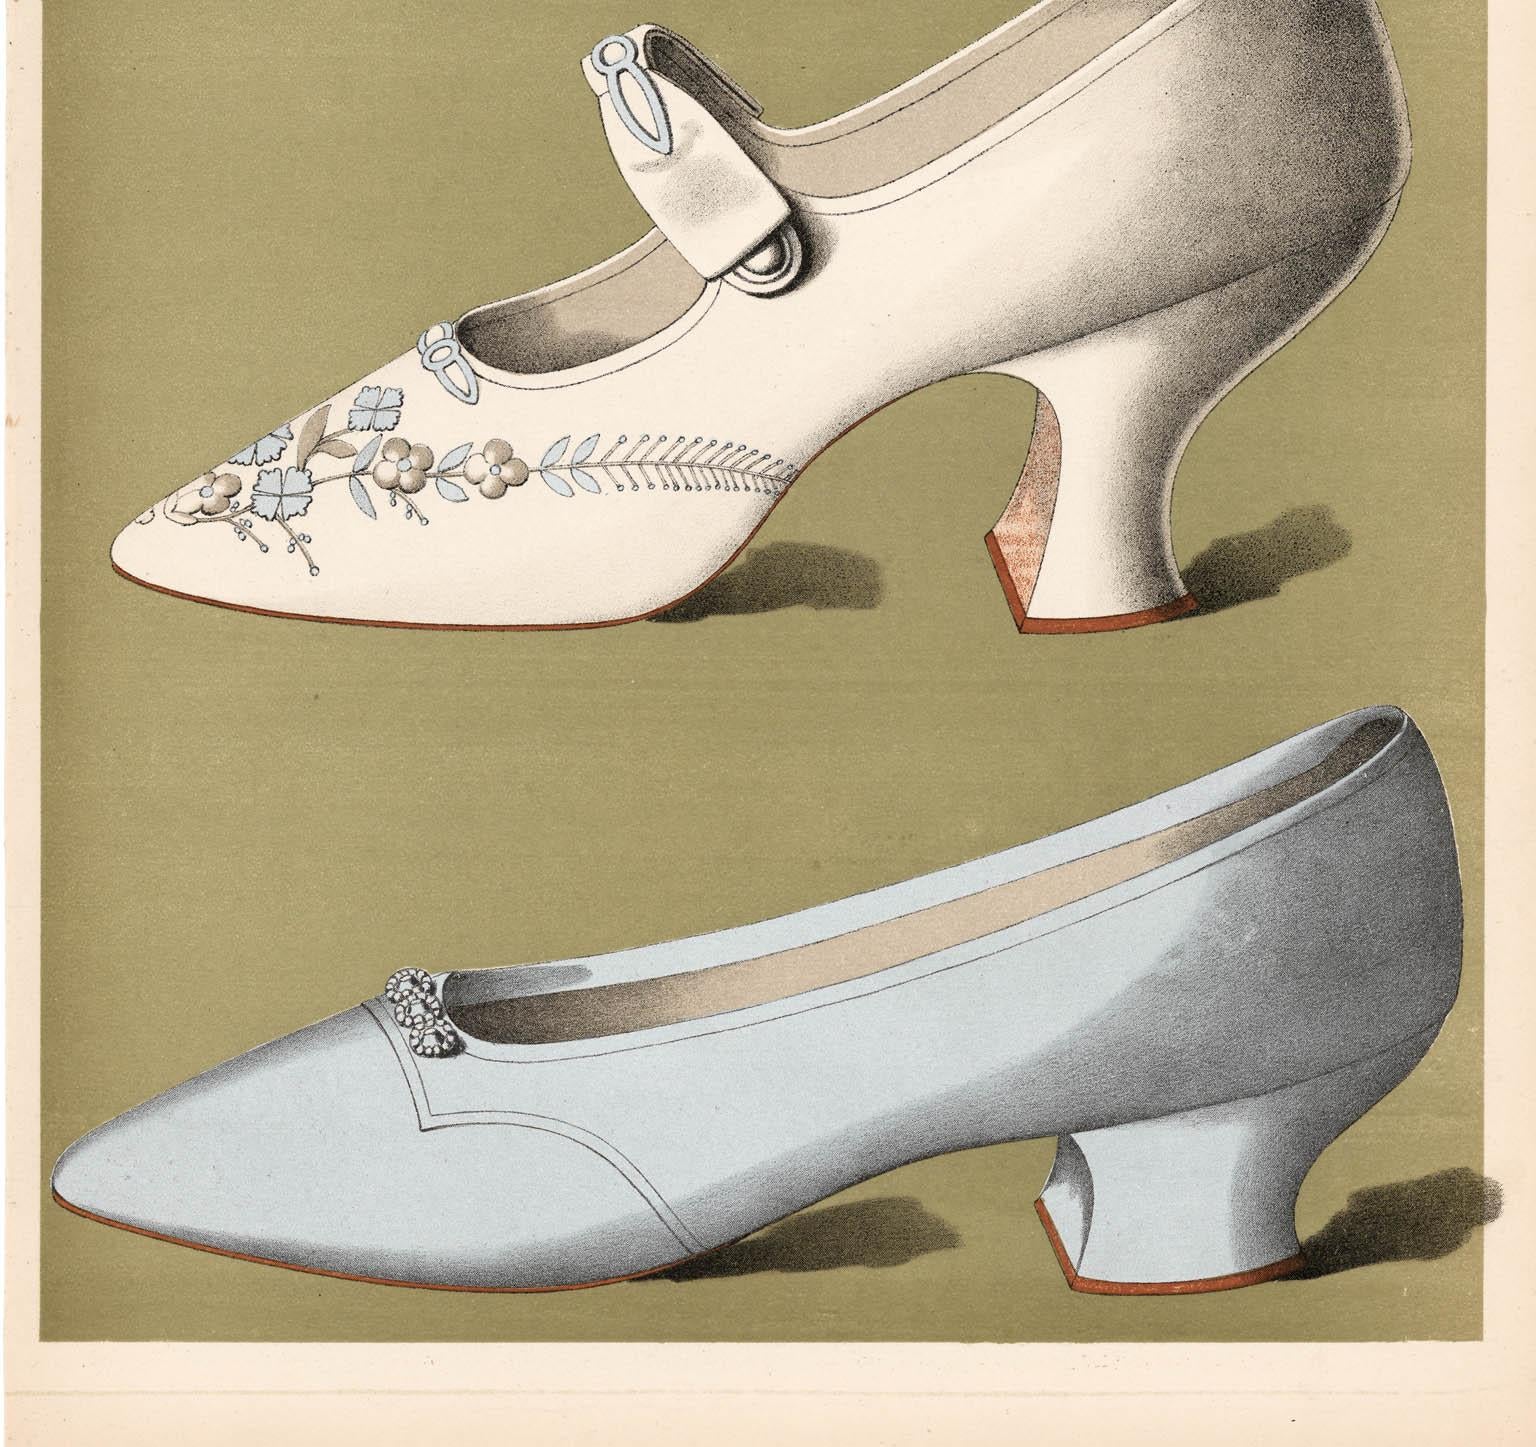 Ladies Dress Shoes.  Plate XII. - Naturalistic Print by T. Watson Greig